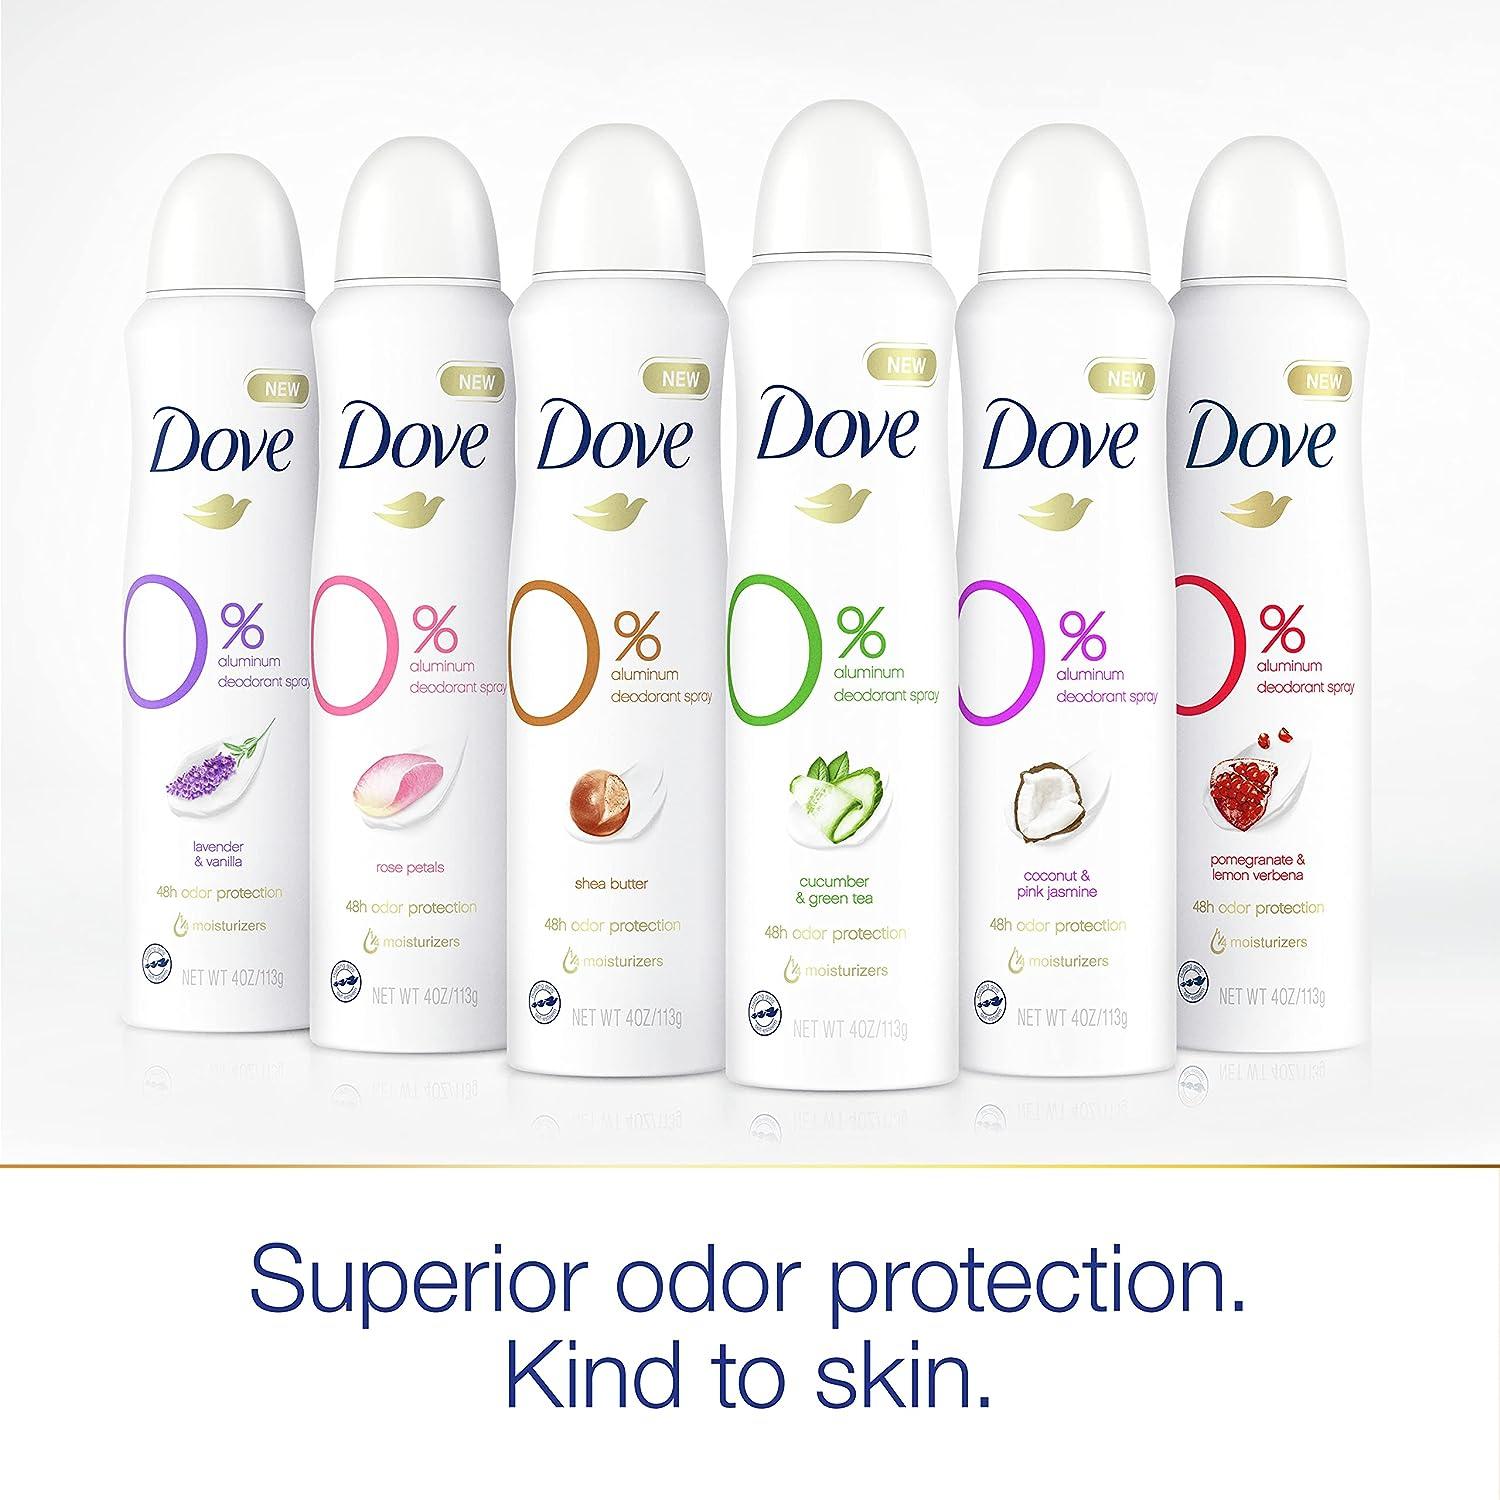 Dove Deodorant Spray For 48 Hour Protection Cucumber and Green Tea